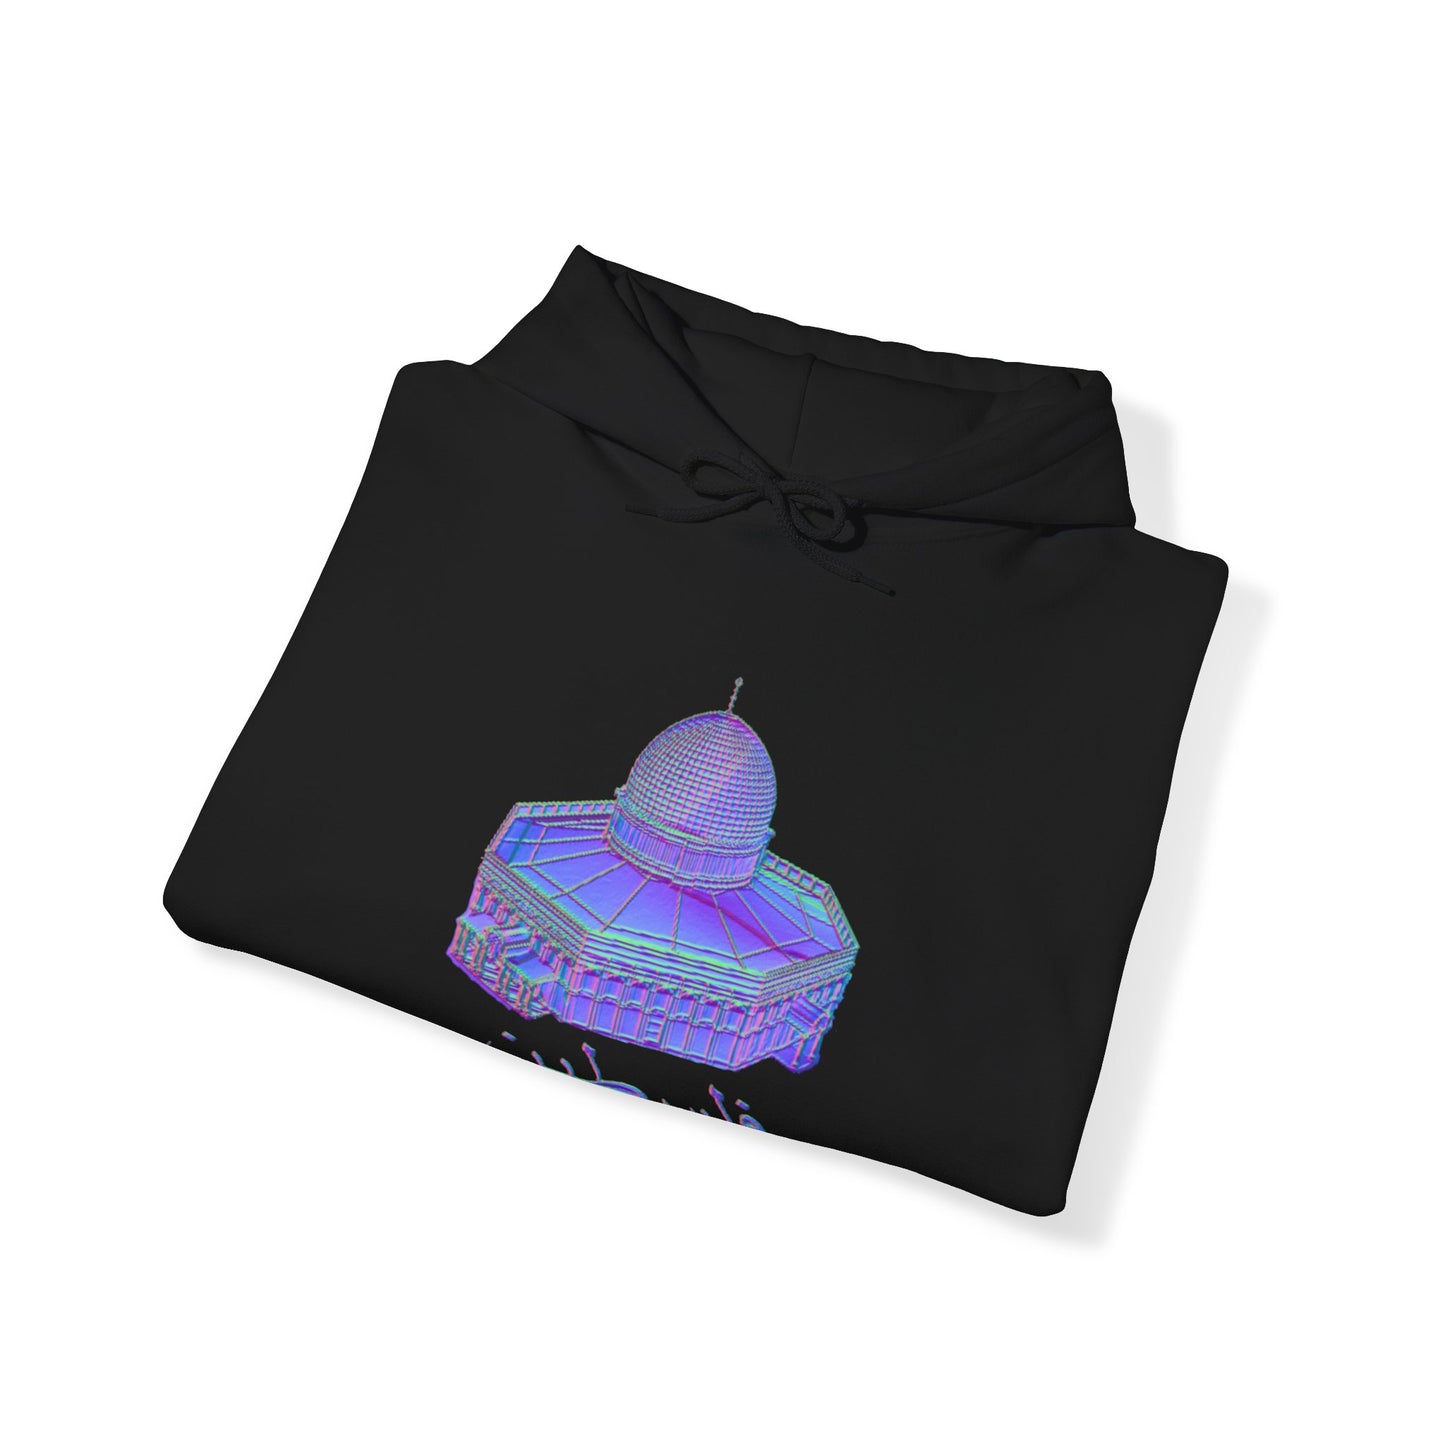 The Blueprint Dome of the Rock Hoodie